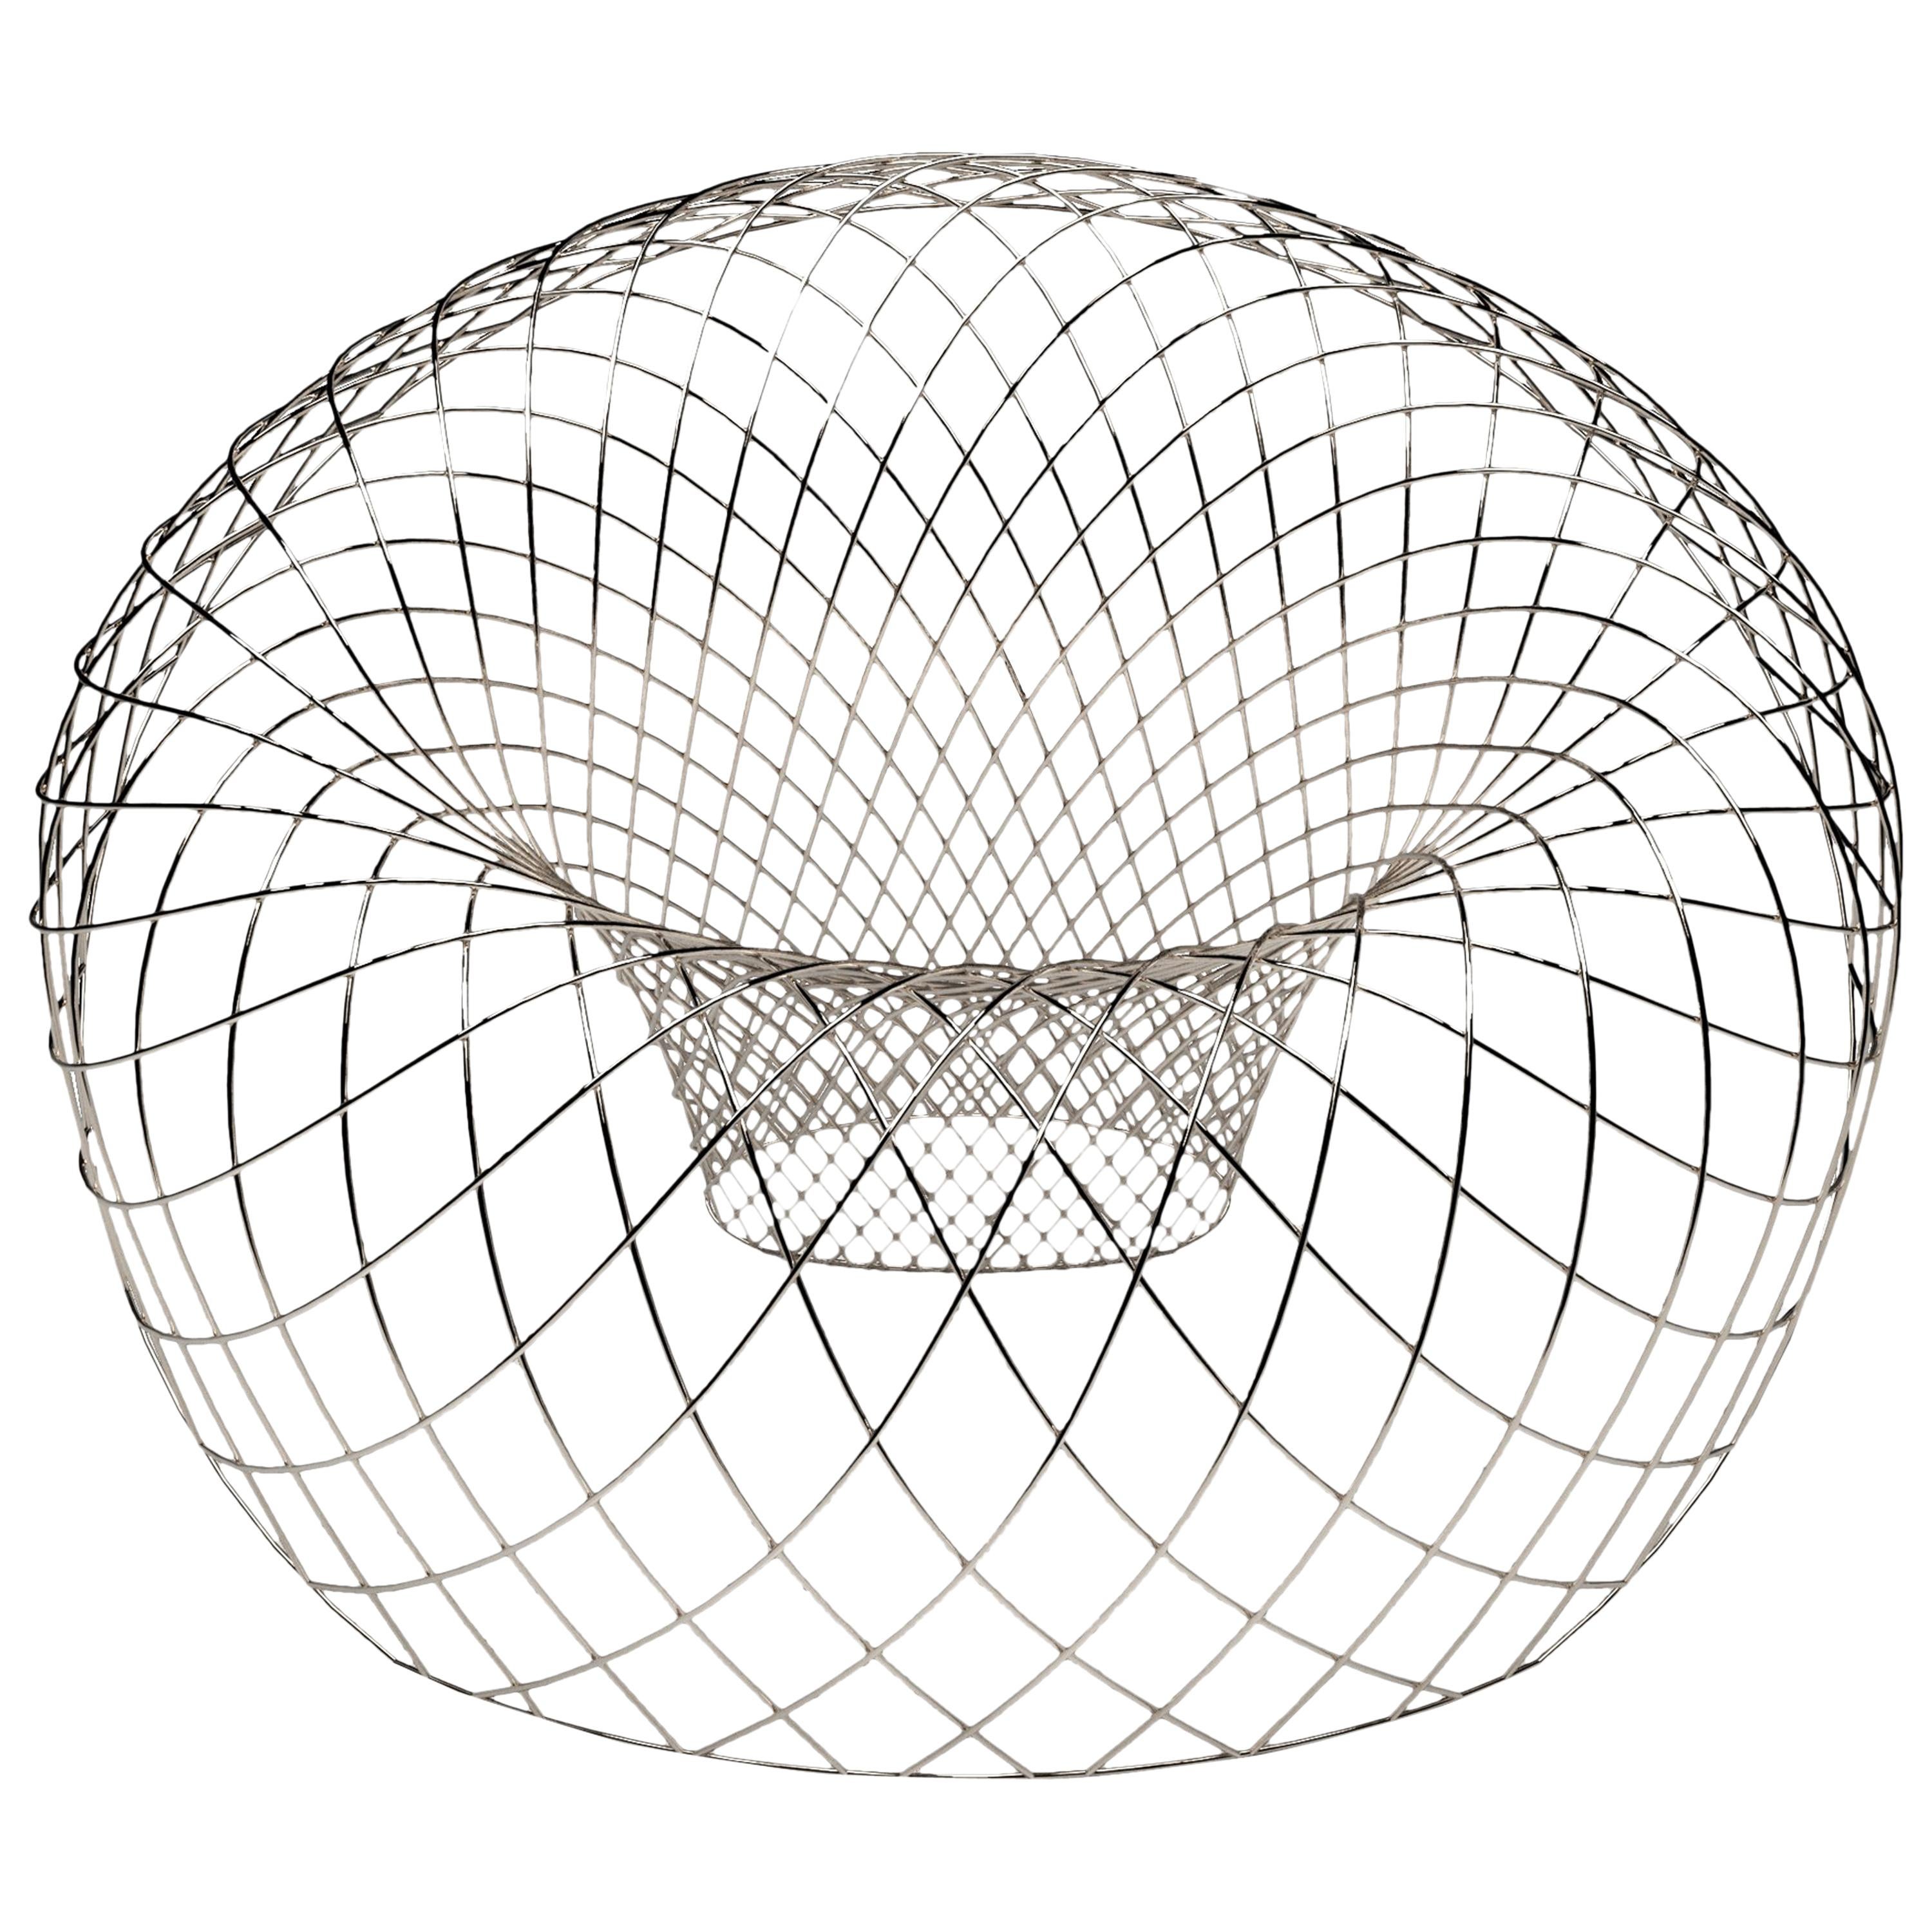 Reverb Wire Chair, Sculptural Stainless Steel Wireframe Chair by Brodie Neill im Angebot